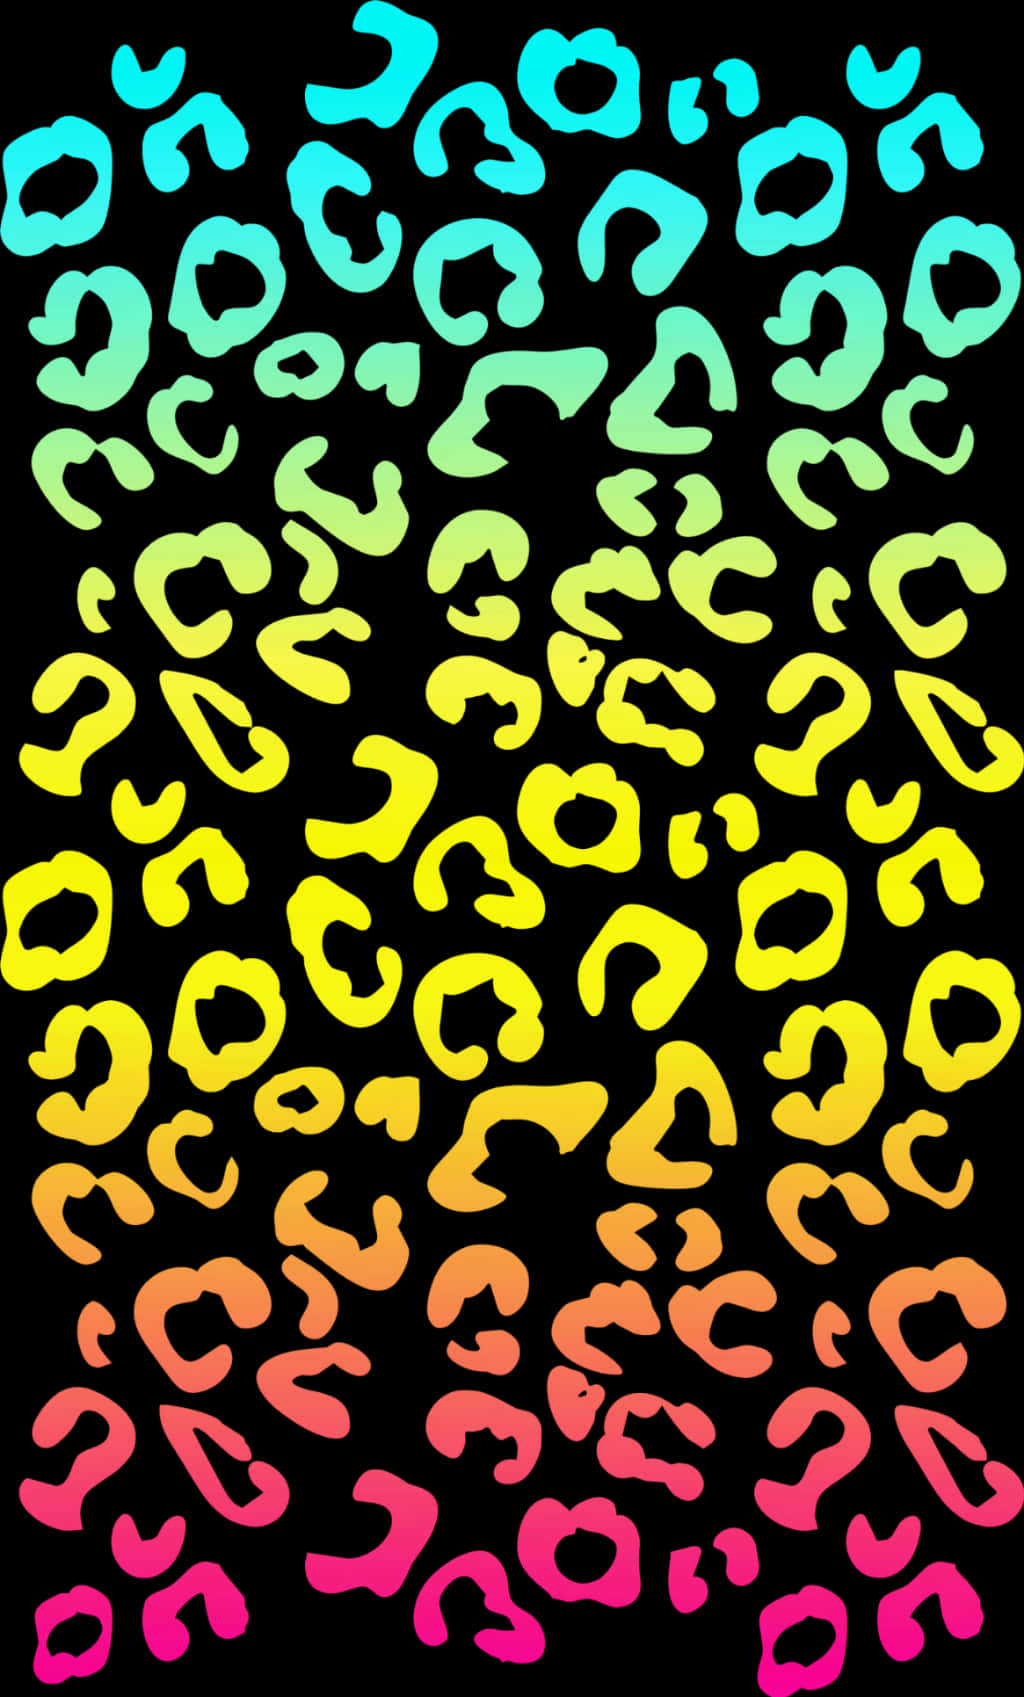 A Colorful Spots On A Black Background